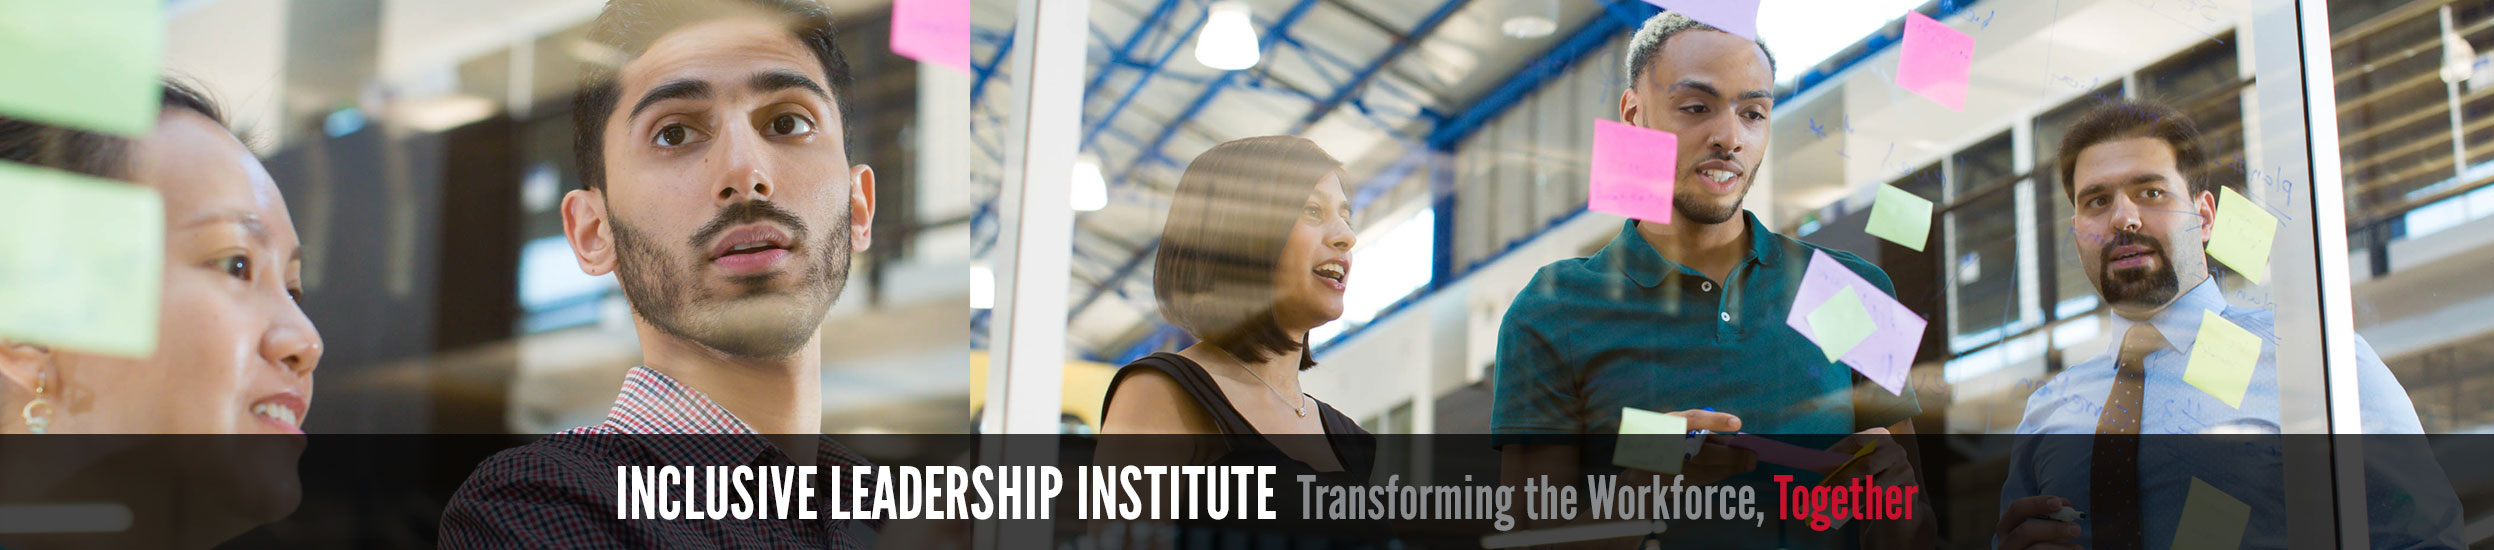 Inclusive Leadership Institute: Transforming the Workforce, Together.